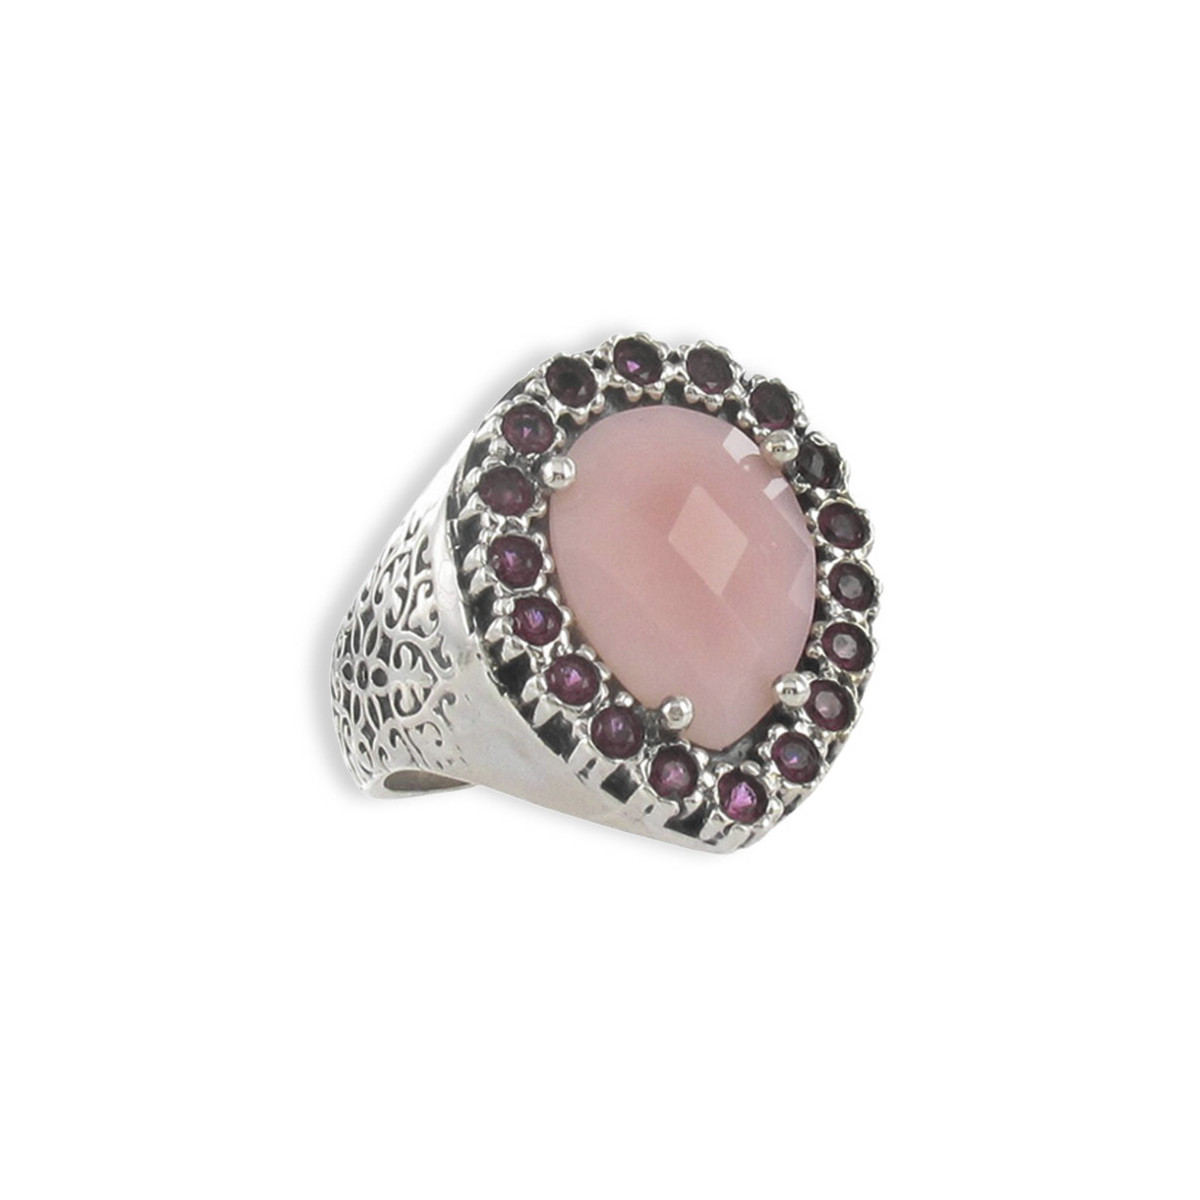 STERLING SILVER RING WITH PINK OPAL